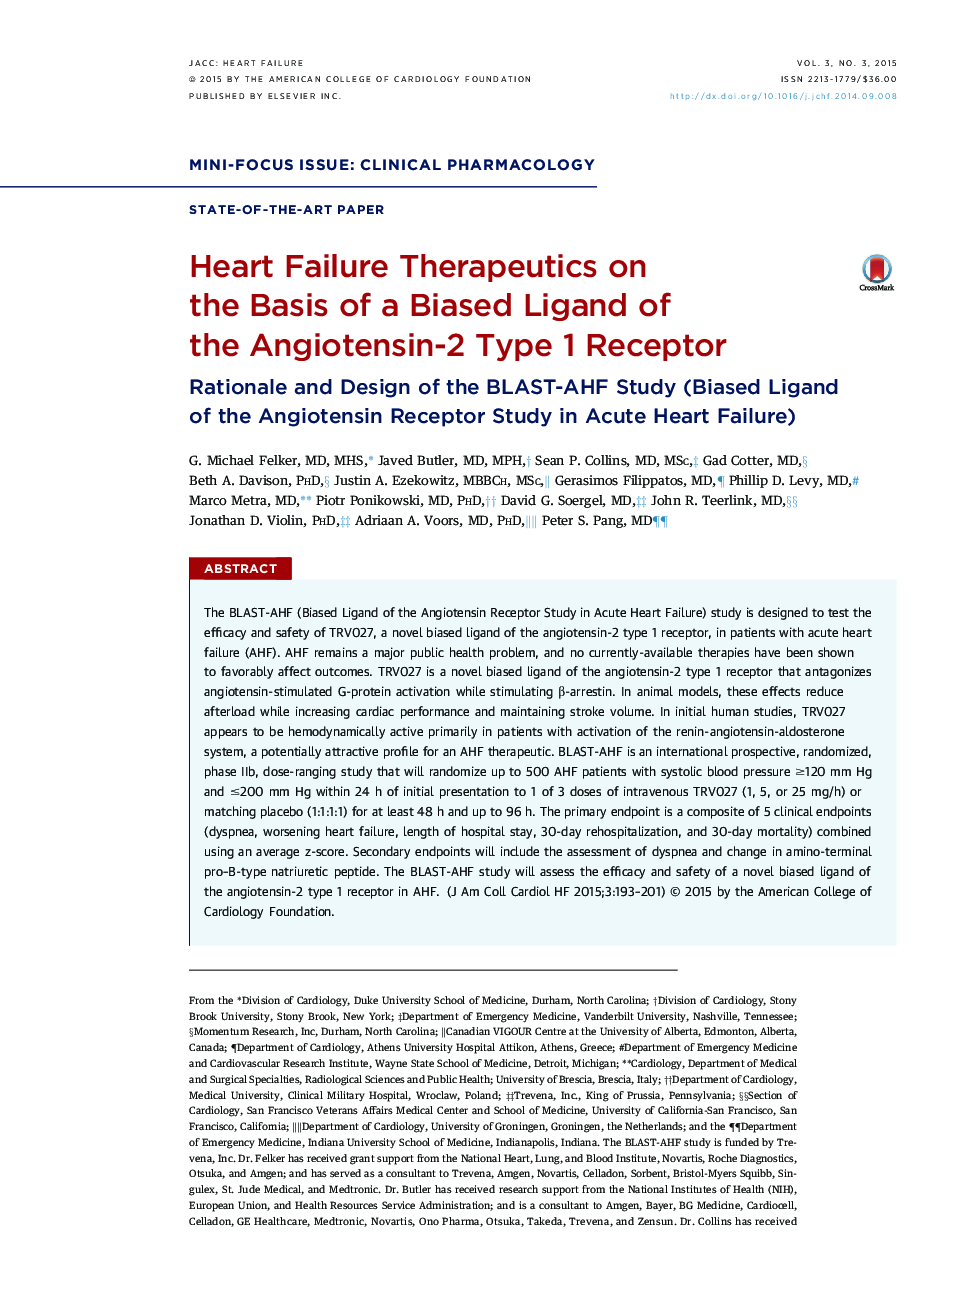 Heart Failure Therapeutics on the Basis of a Biased Ligand of the Angiotensin-2 Type 1 Receptor : Rationale and Design of the BLAST-AHF Study (Biased Ligand of the Angiotensin Receptor Study in Acute Heart Failure)